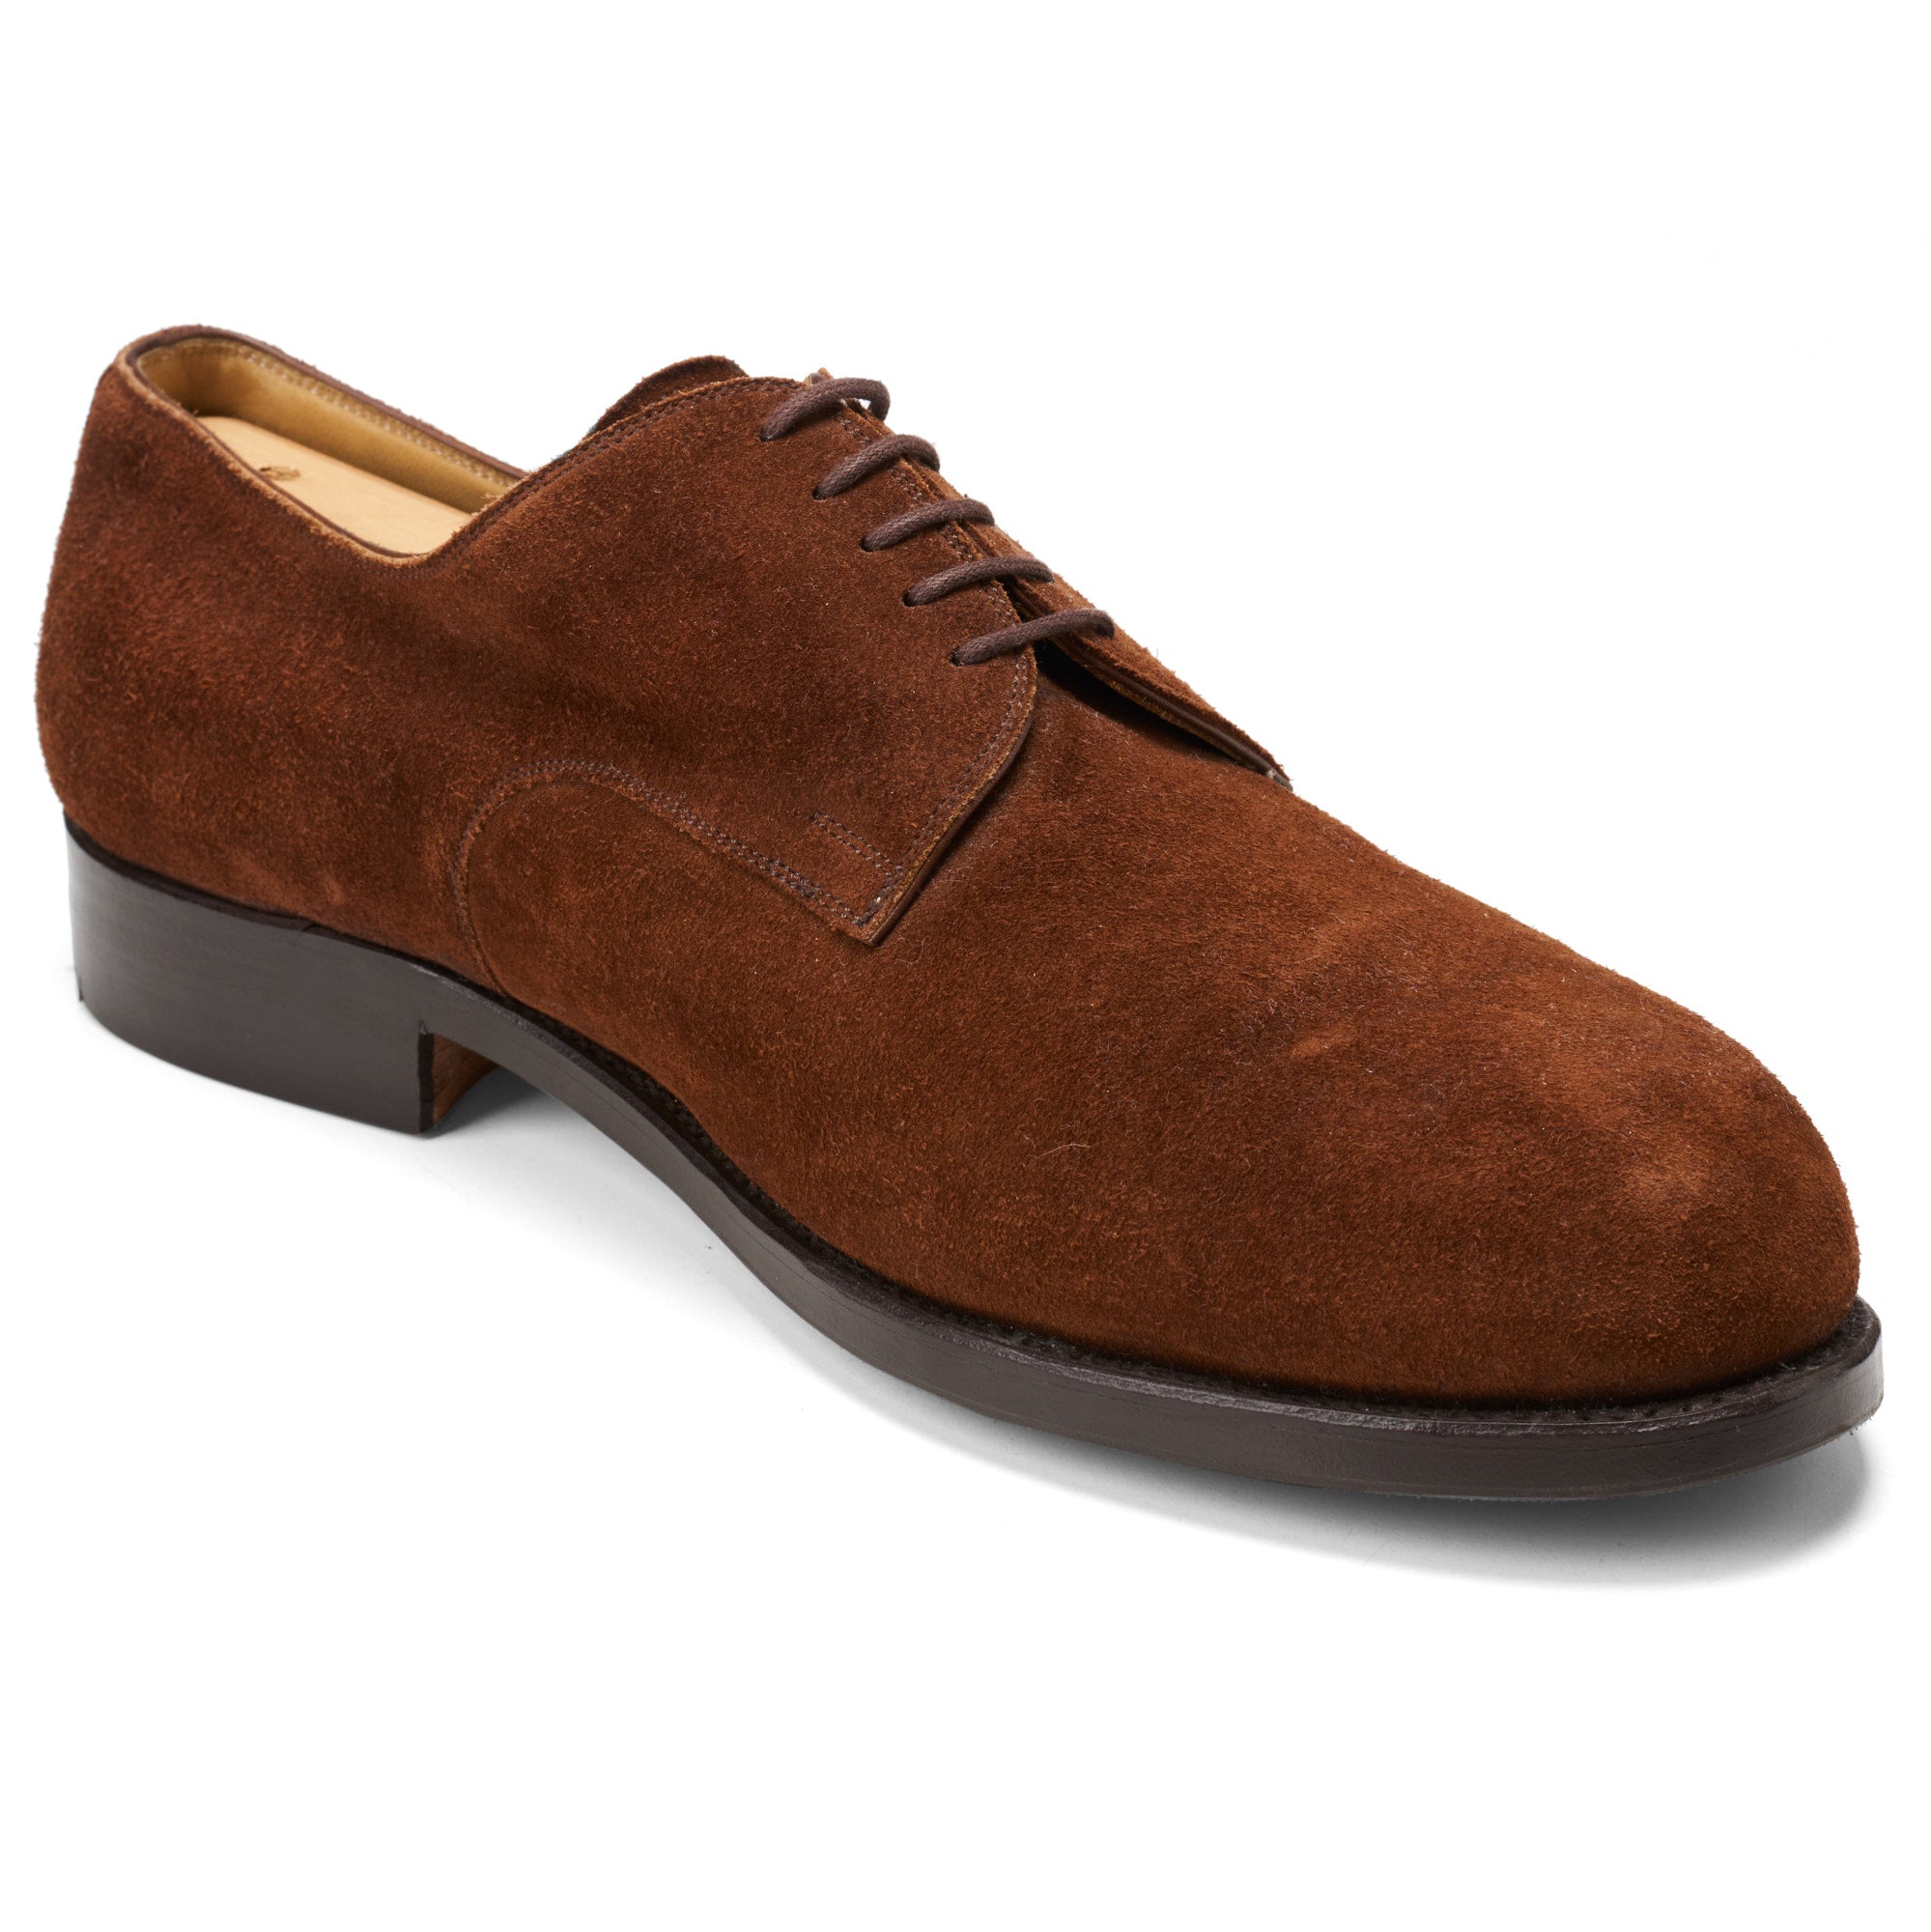 VASS Budapest Brown Suede Leather "London 5 Eyelet" Derby Shoes Last BP US 14 VASS BUDAPEST